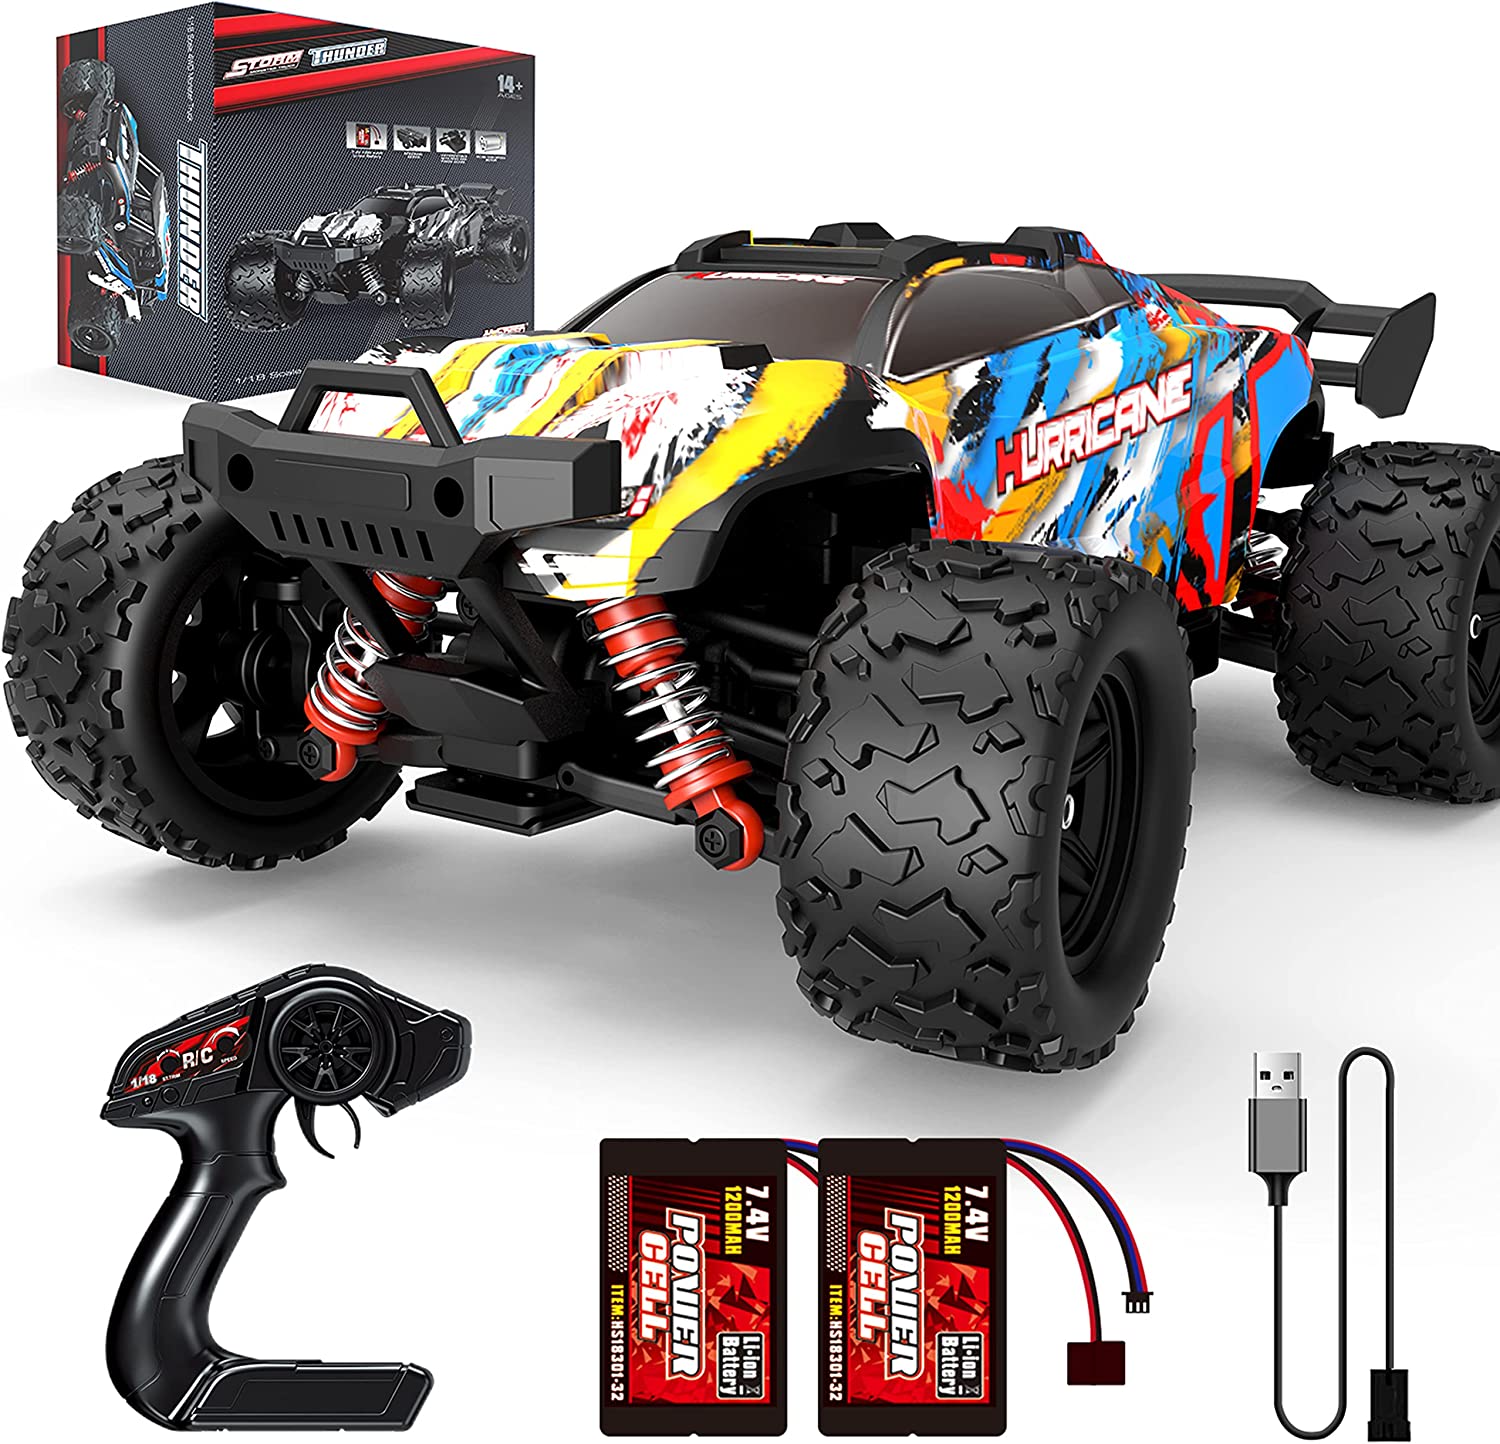 Boersma Remote Control Car, Fast RC Drift Car for Boys - 1/28 Scale 2WD  High Speed Off Road Mini RC Car, Hobby Racing Vehicle Toys Gifts for Kids  Age